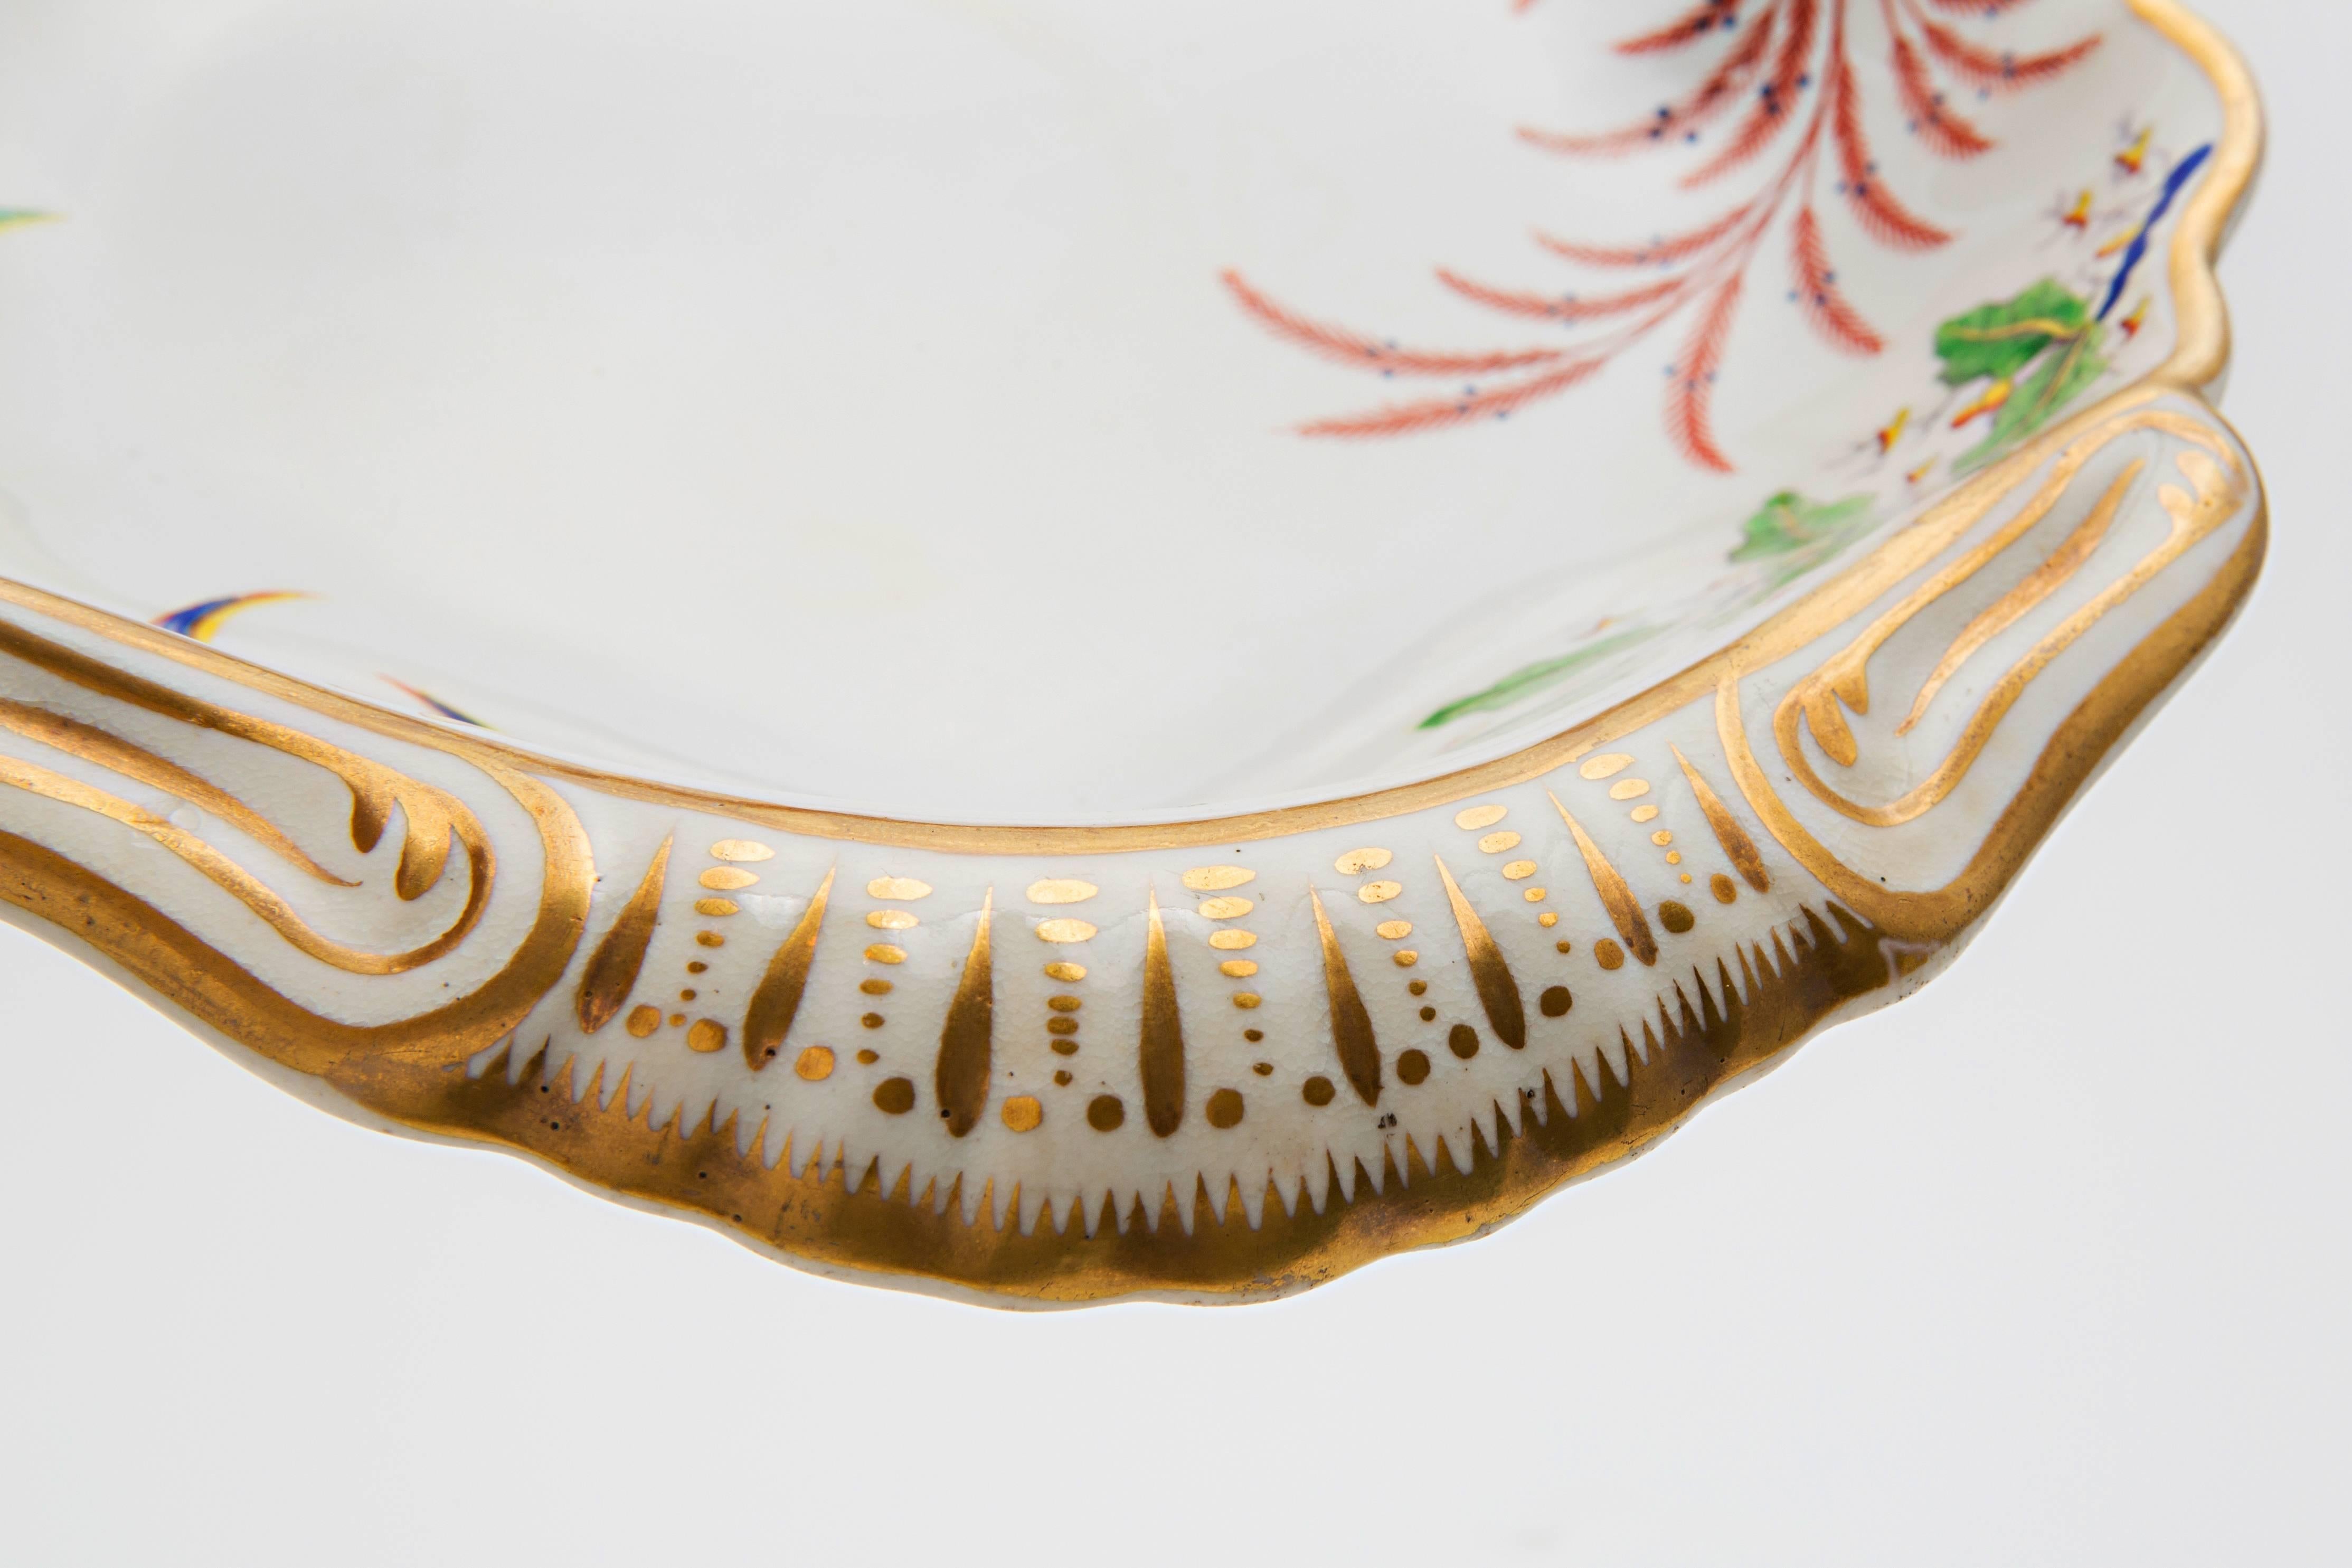 19th Century Spode Porcelain Shell Dish For Sale 2